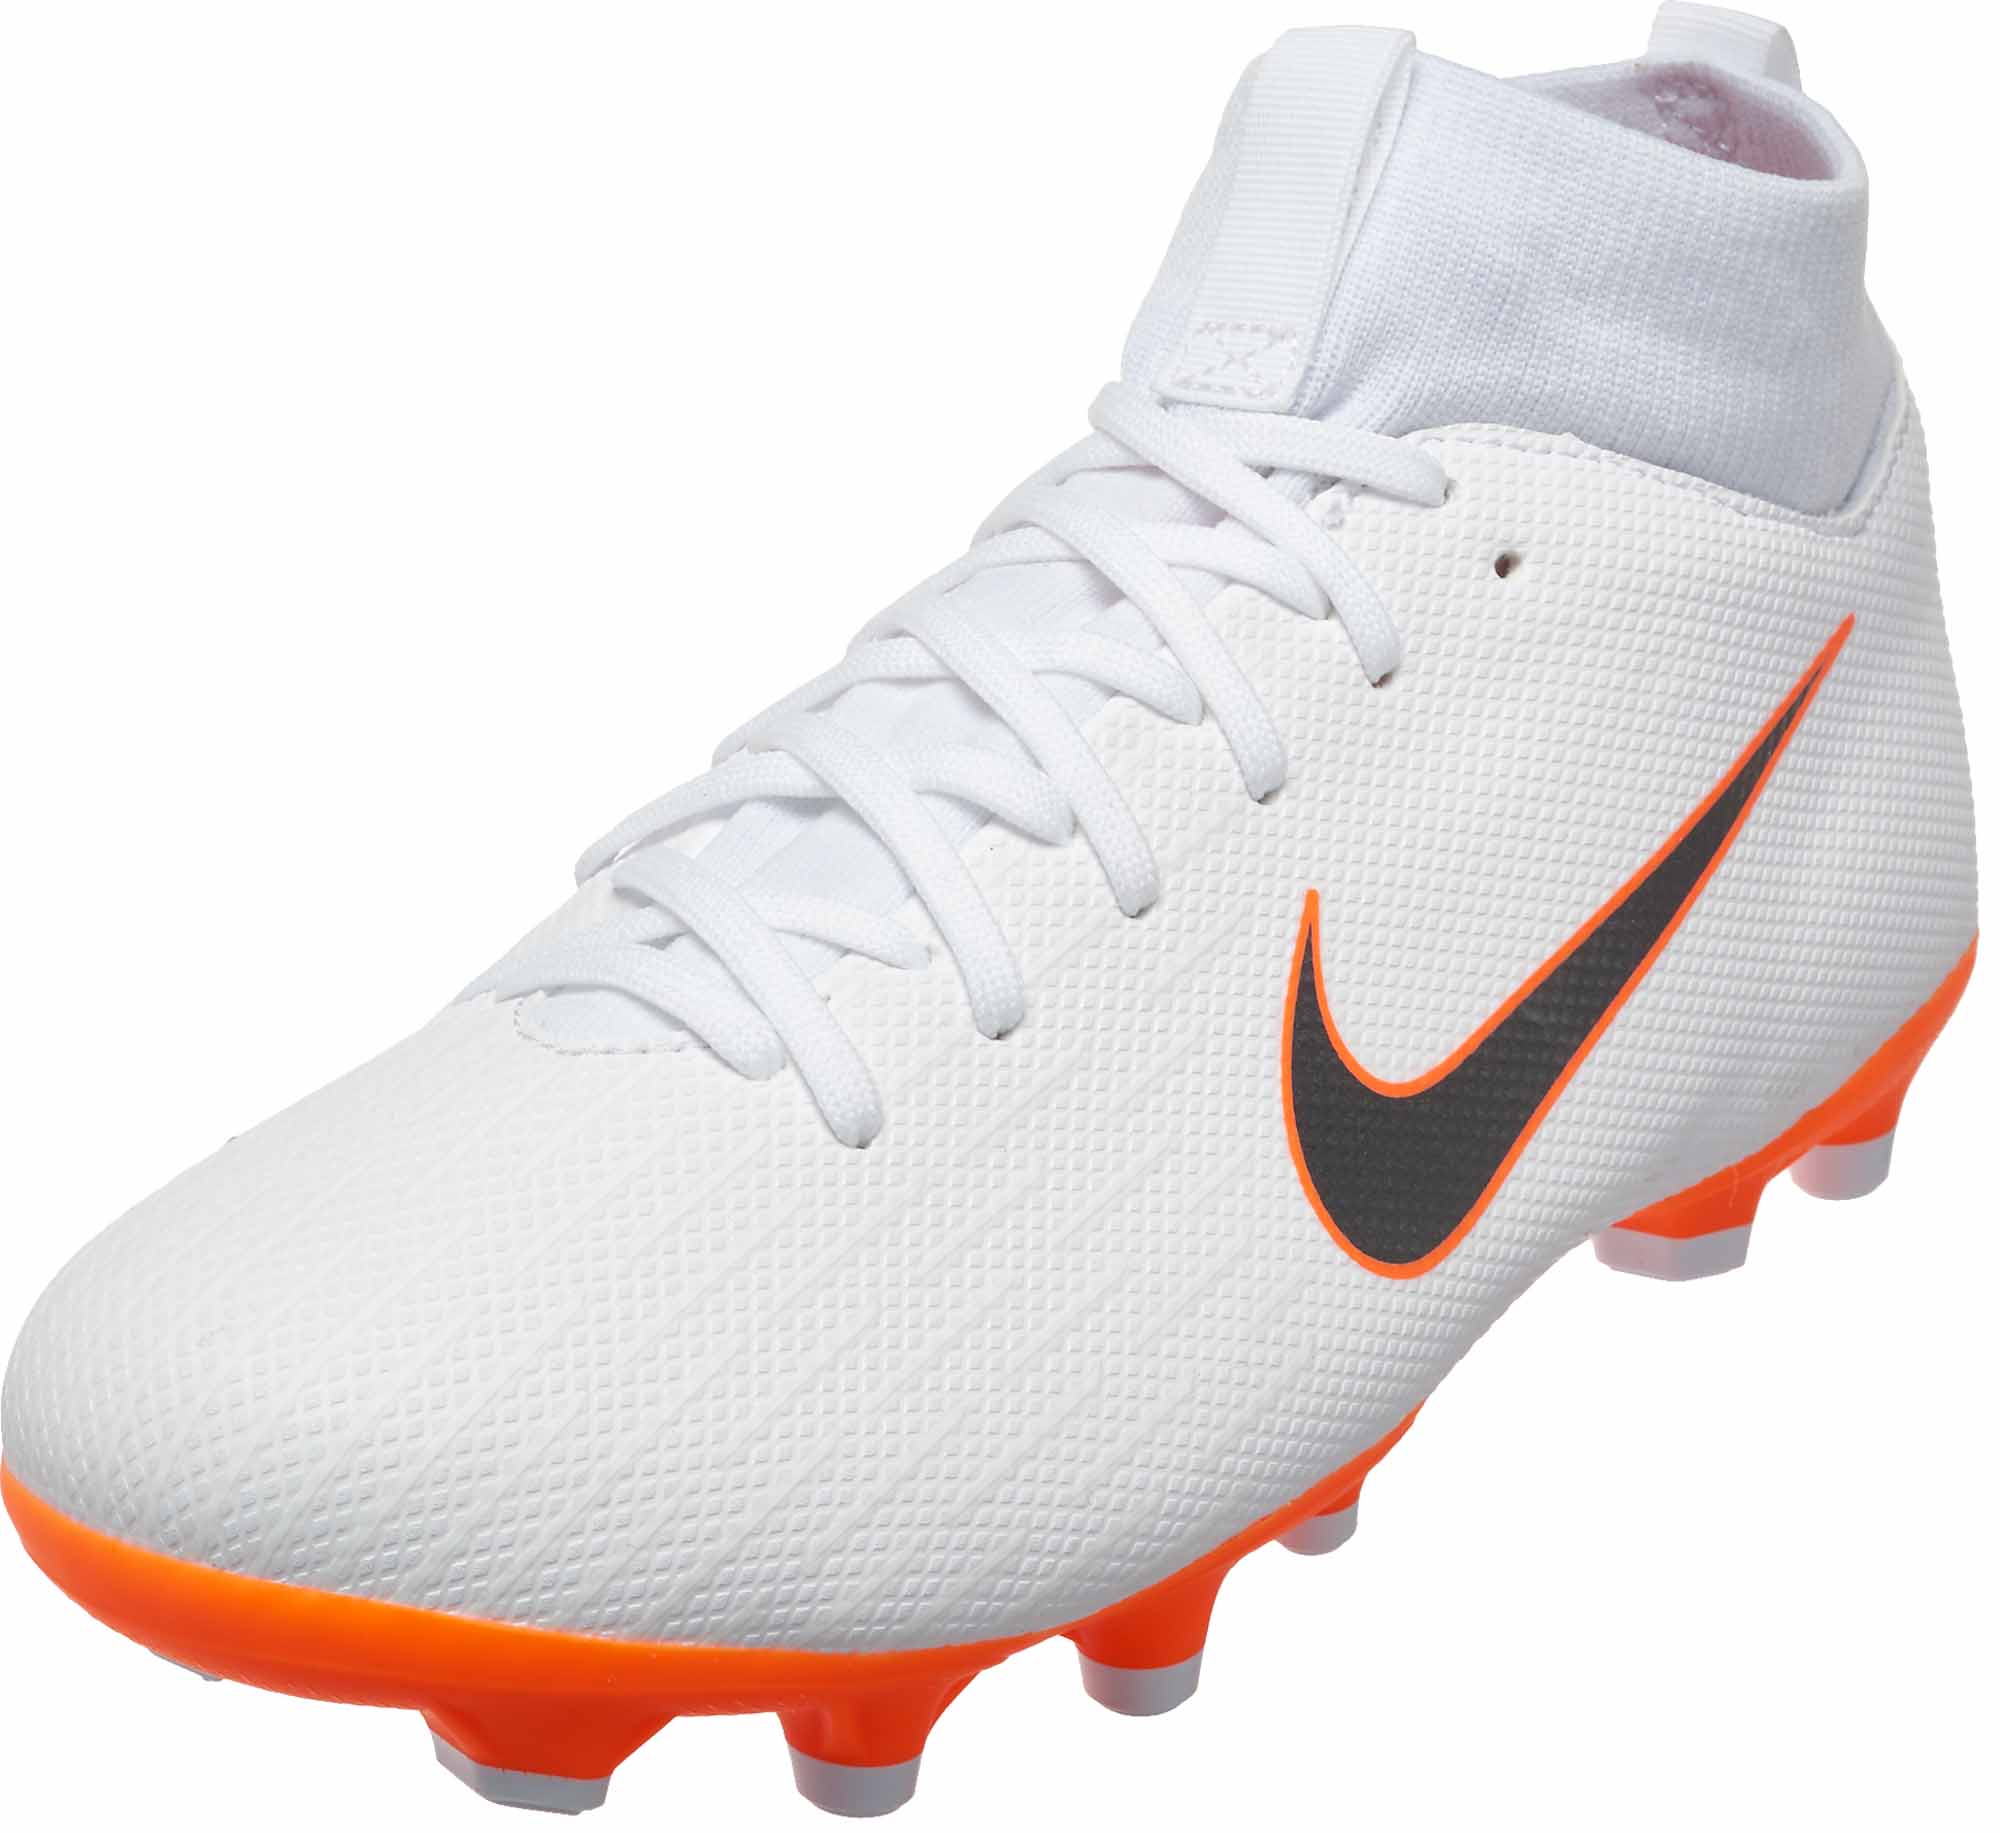 orange soccer cleats youth